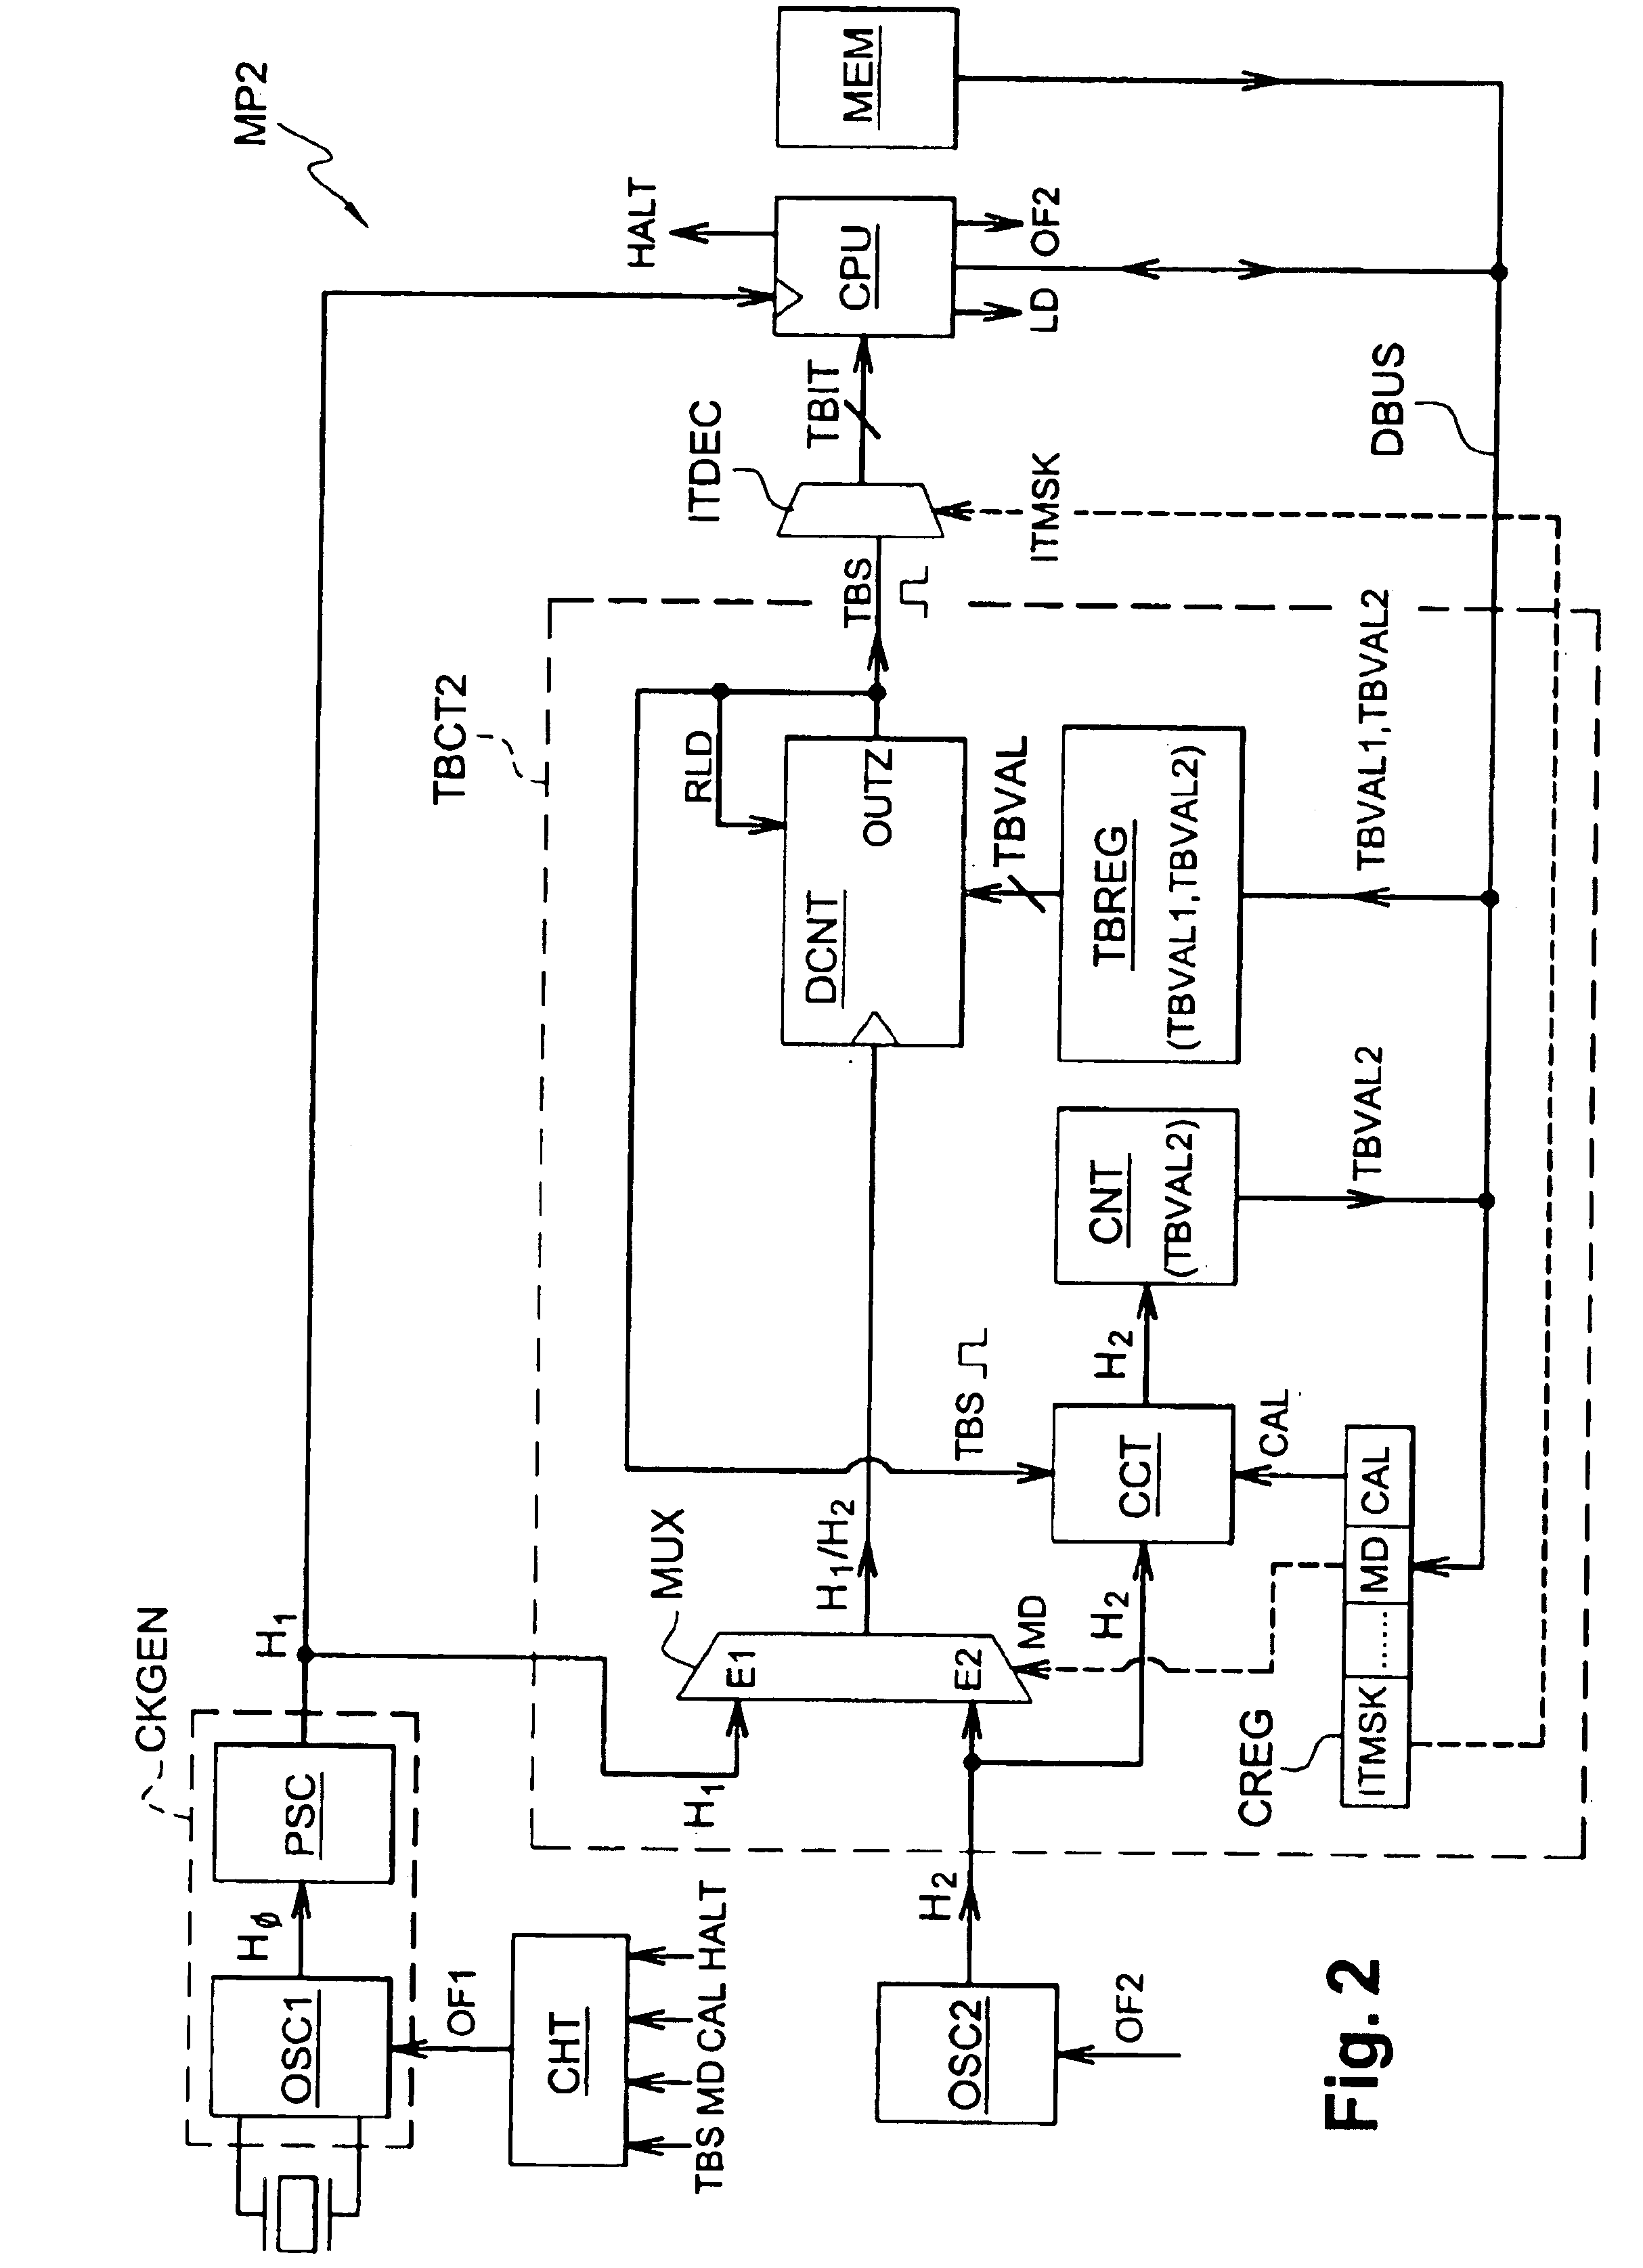 Microprocessor comprising a self-calibrated time base circuit